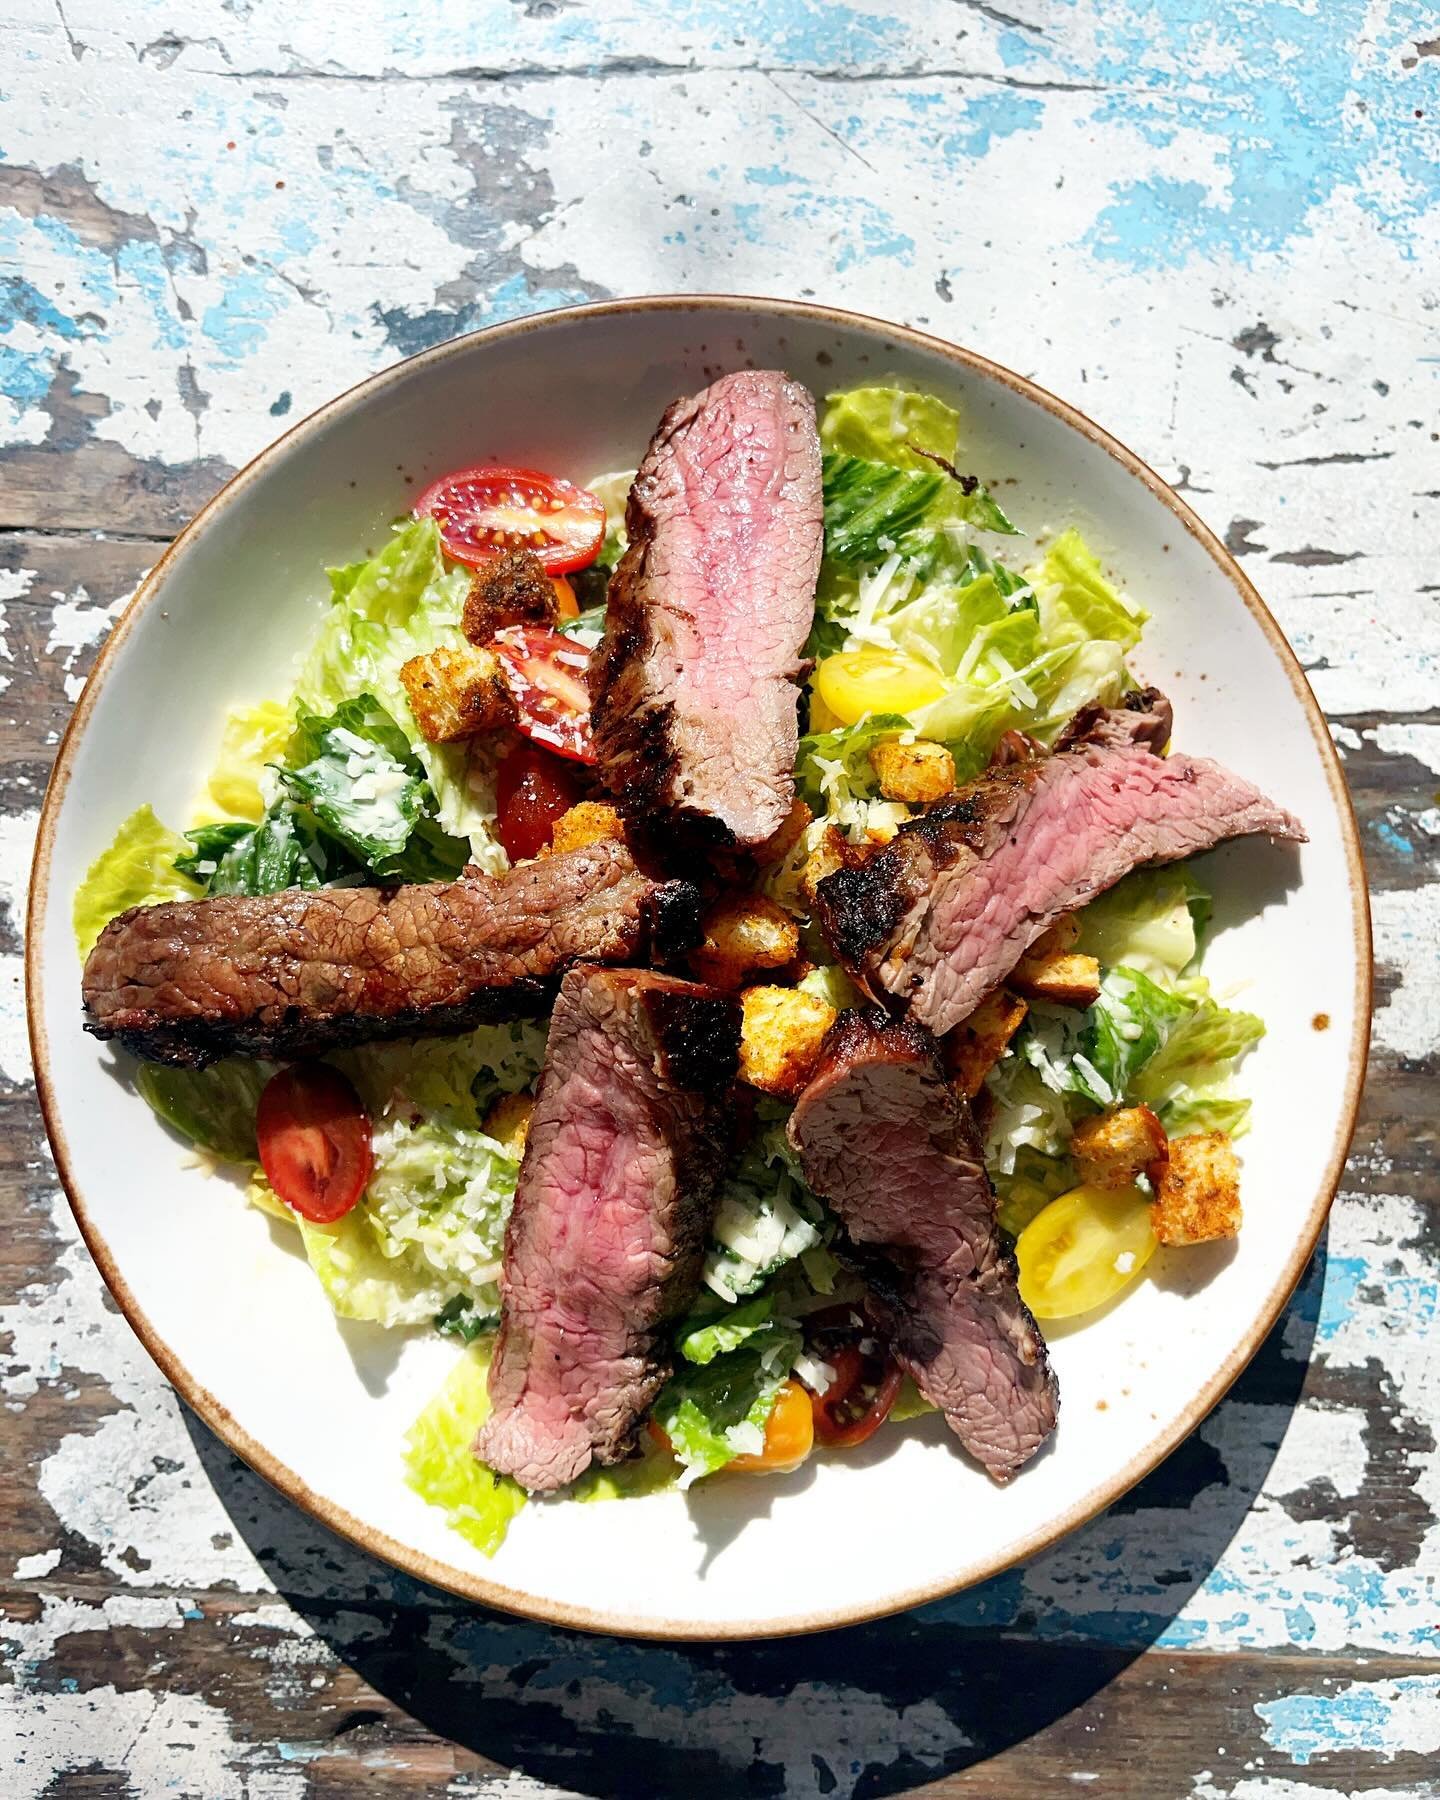 Steak Cesar Salad with house-made croutons